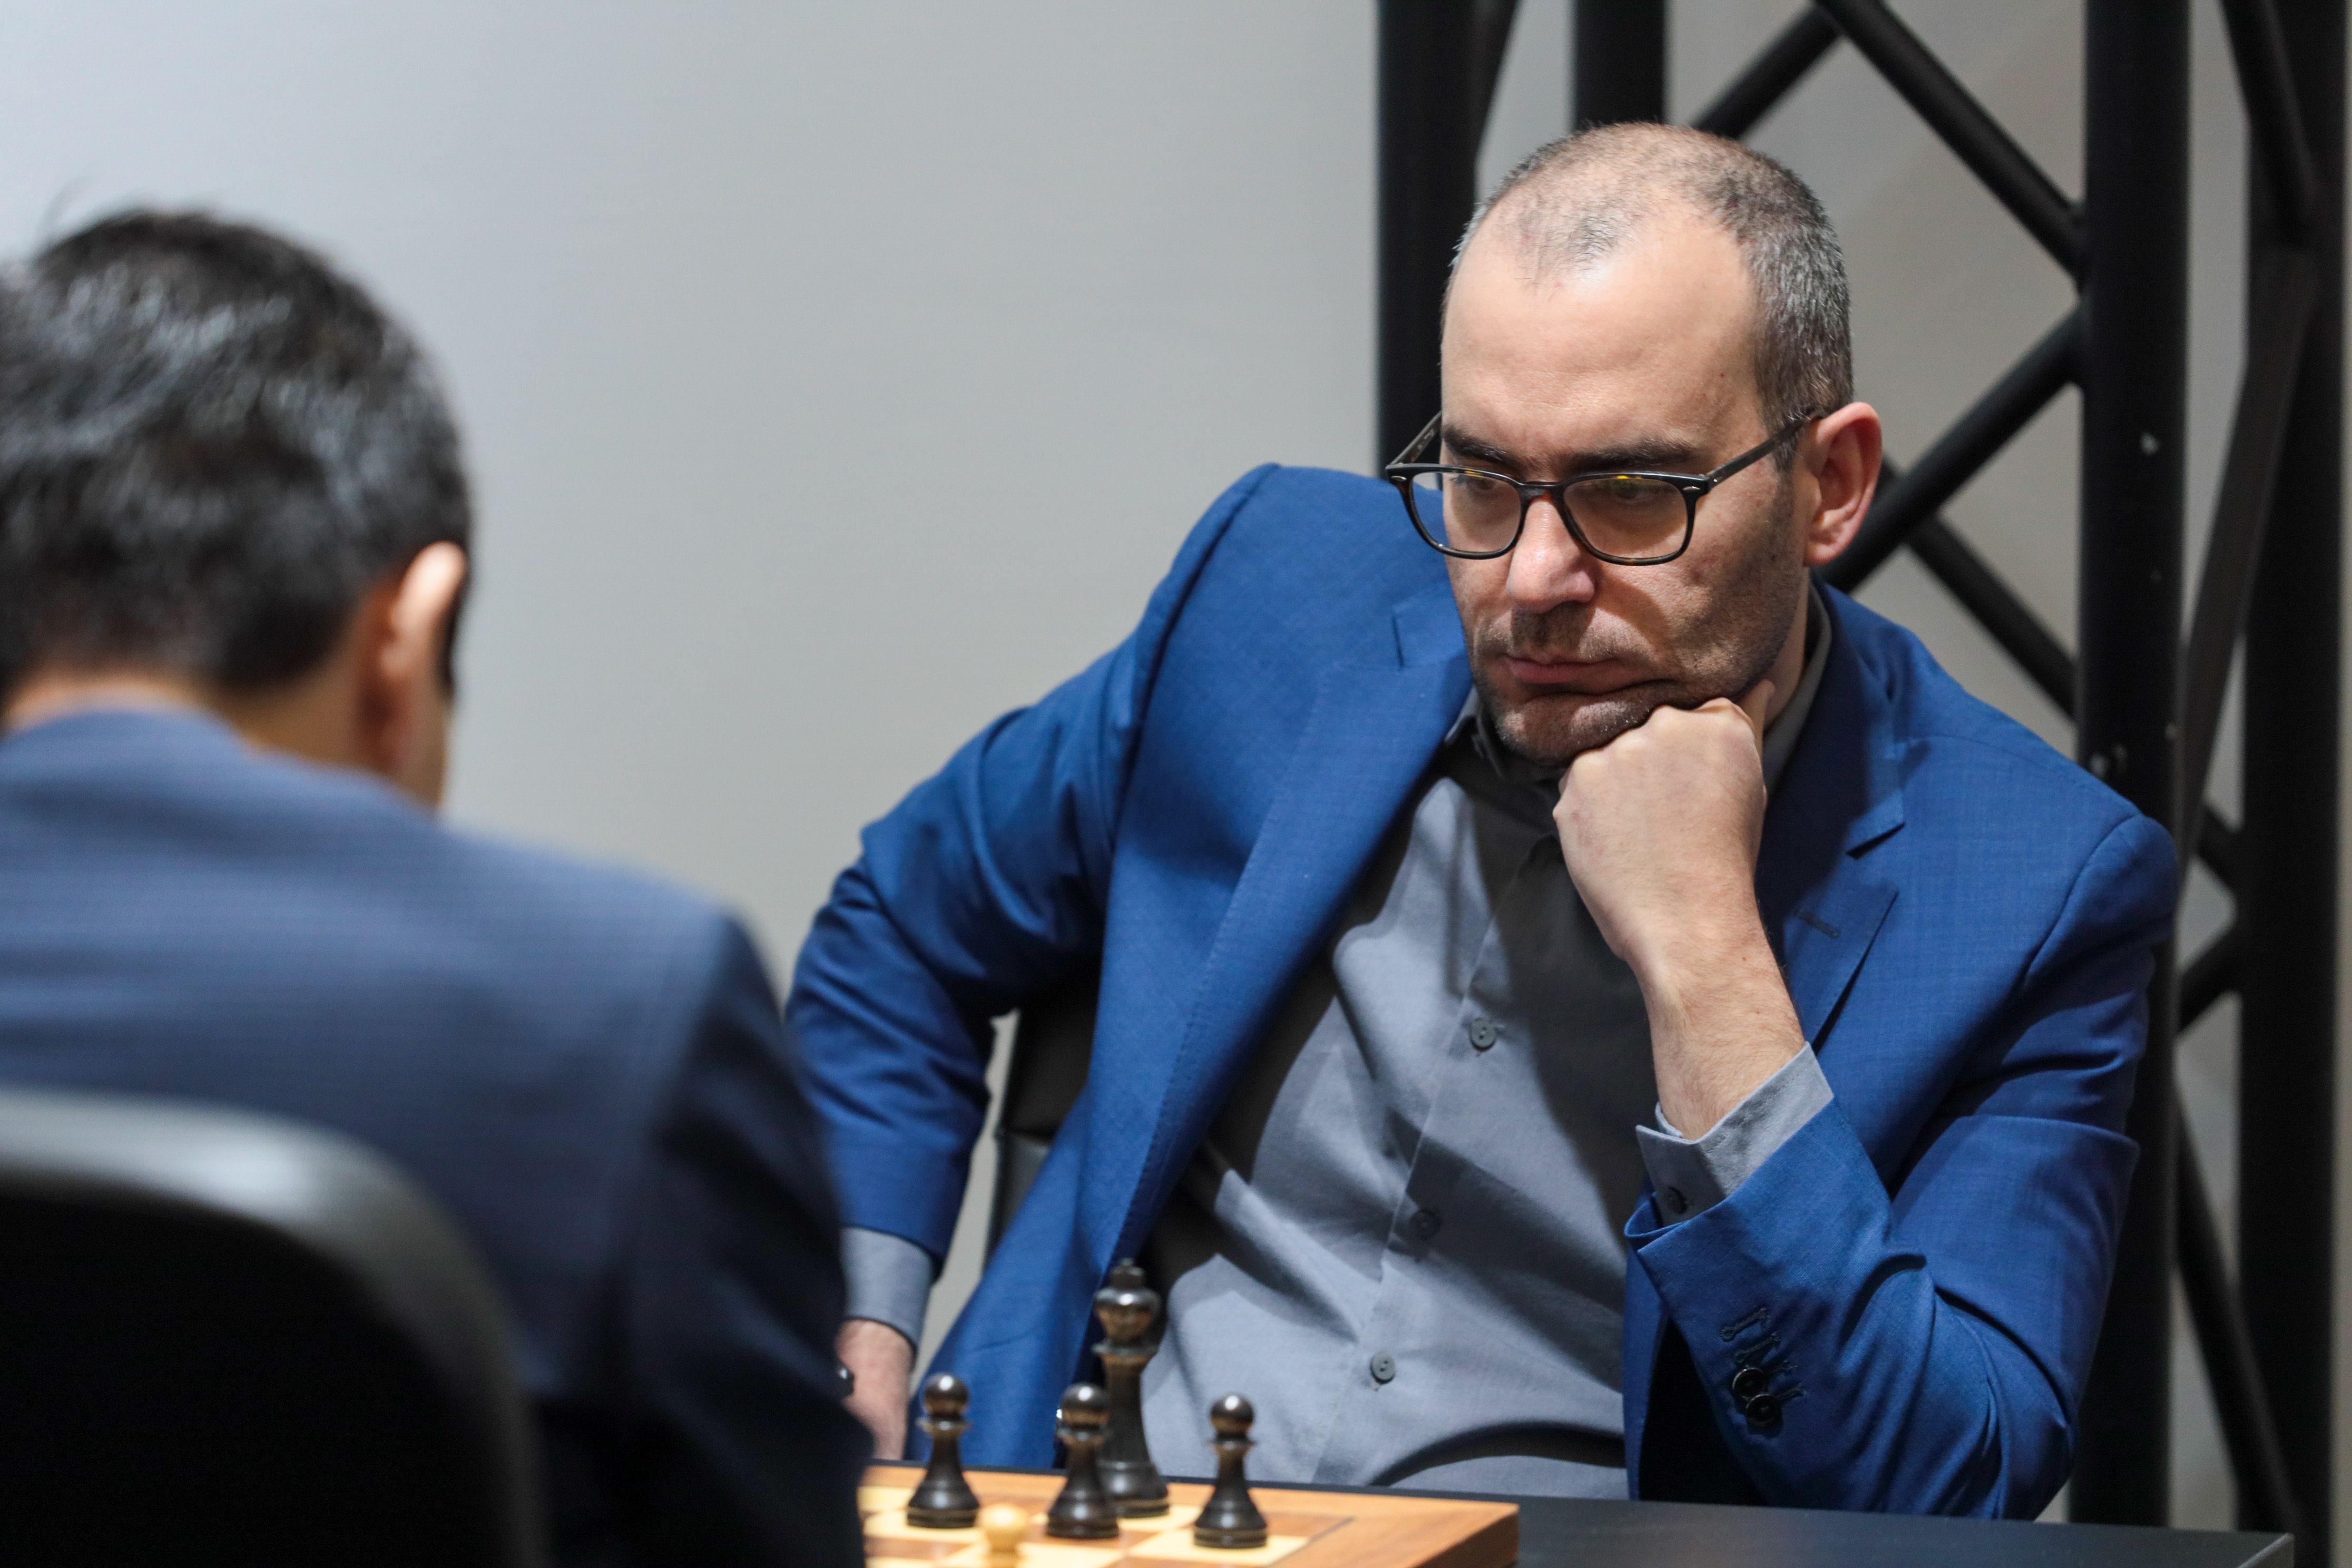 Daniil Dubov and Vincent Keymer after Round 4 of the FIDE Grand Prix 2022  in Berlin 